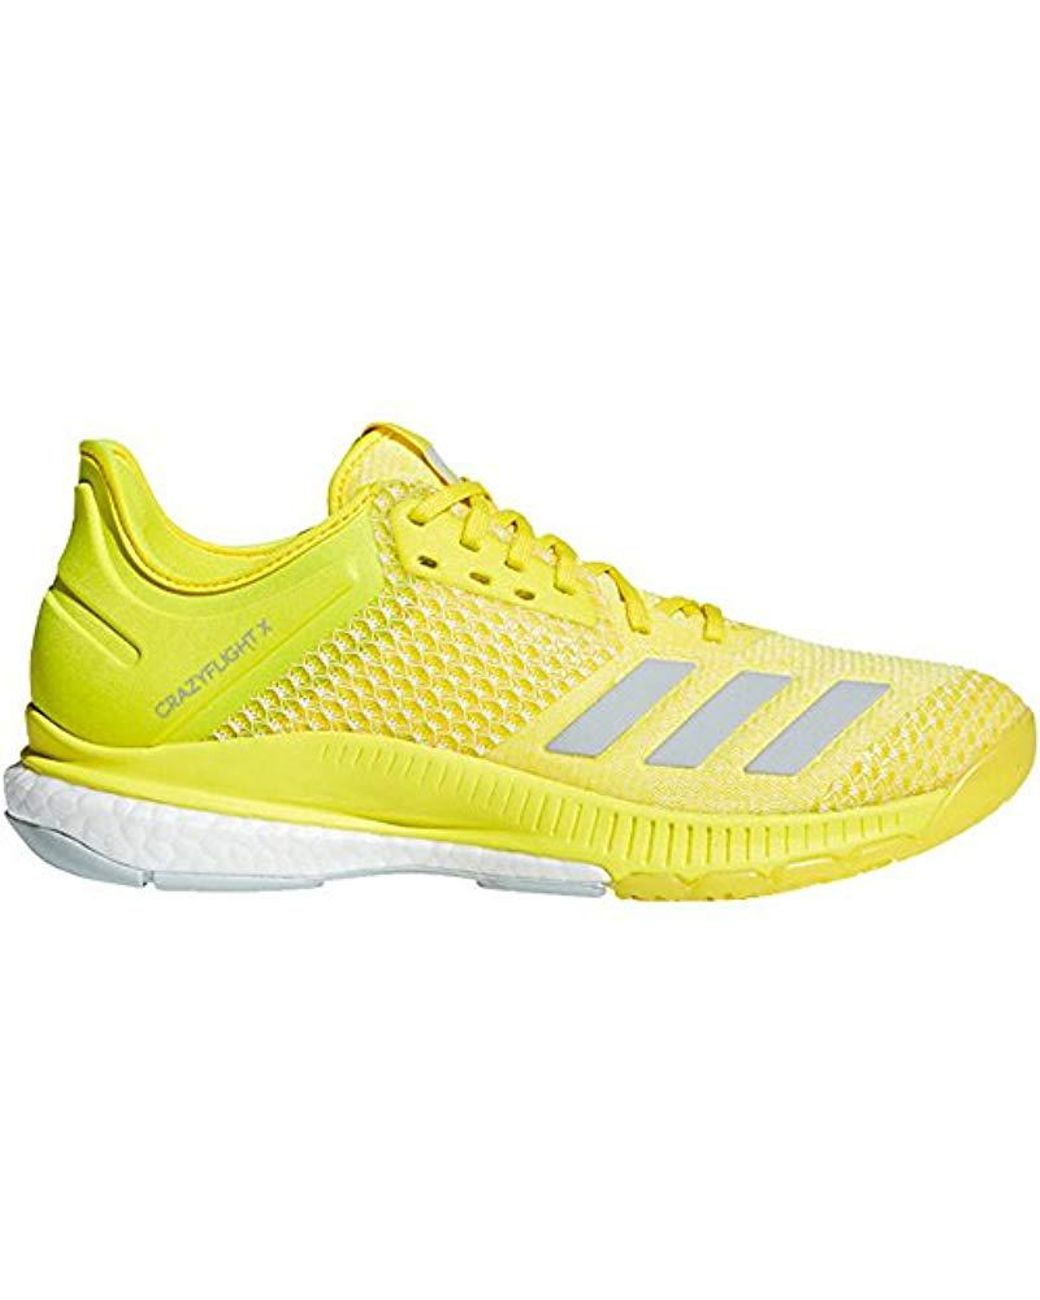 adidas Crazyflight X 2 Shoes in Yellow | Lyst